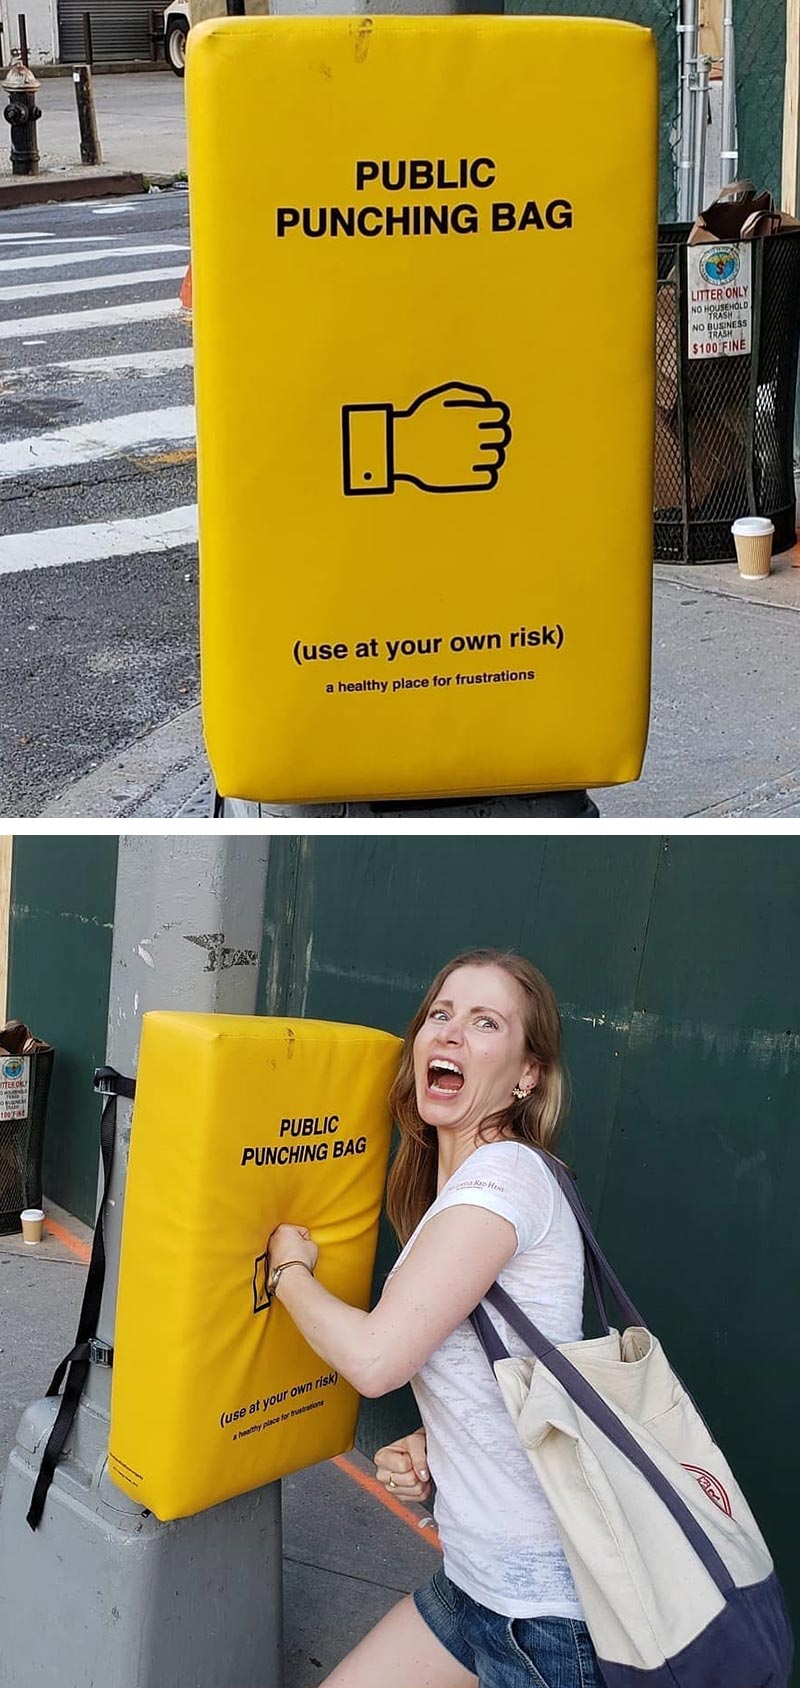 Public punching bags have been installed across Manhattan to provide relief for frustrated New Yorkers